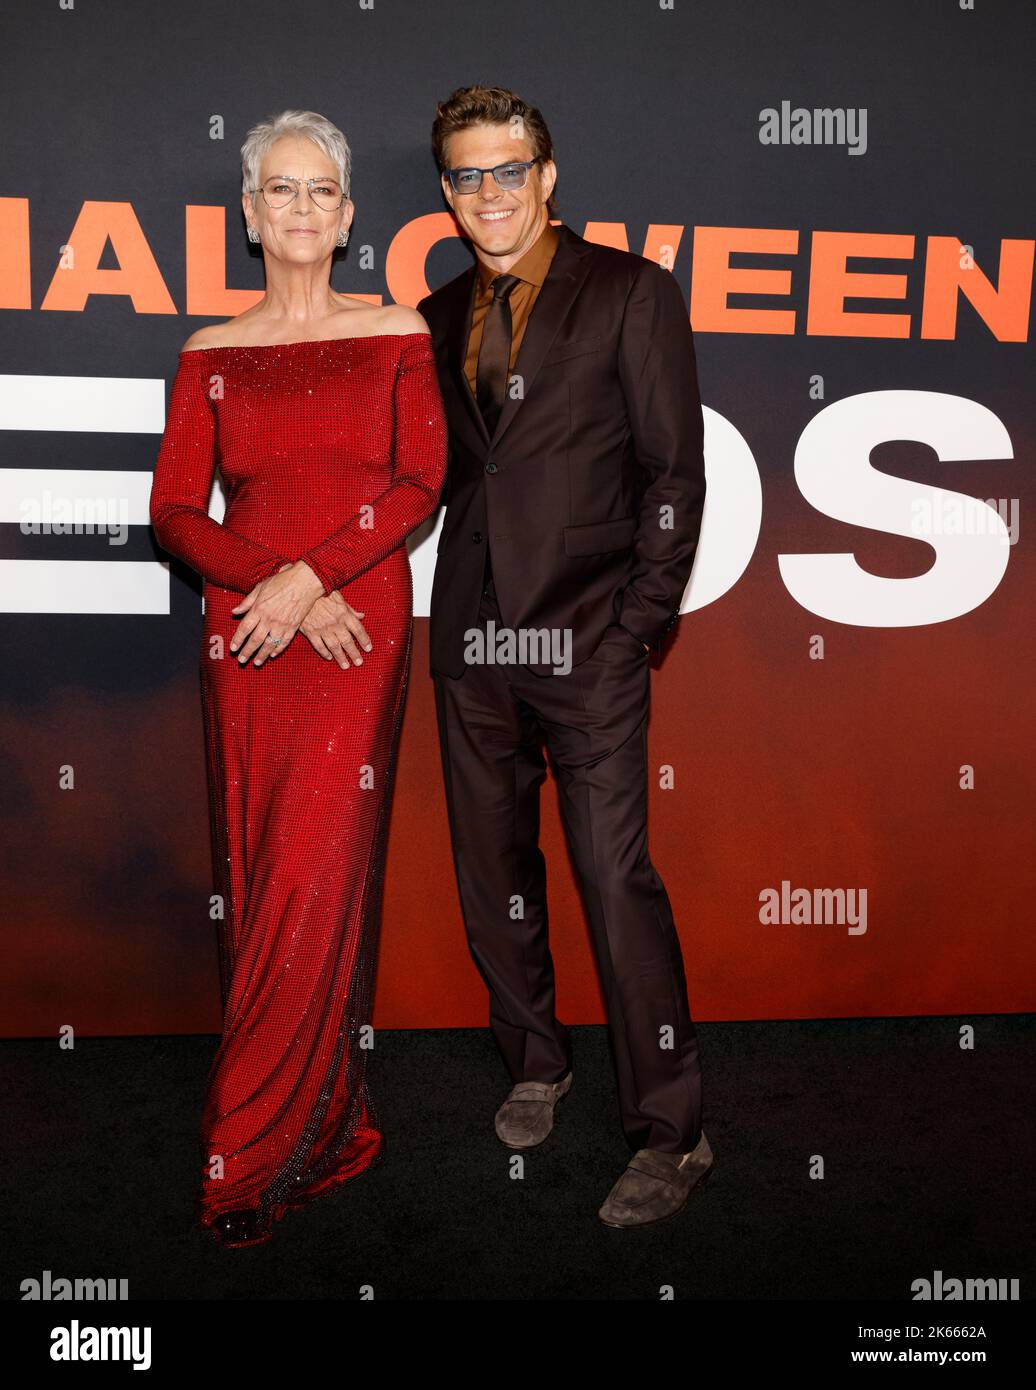 Los Angeles, USA. 11th Oct, 2022. Los Angeles, USA - Oct 11, 2022: Jamie Lee Curtis and Jason Blum attend the premiere of 'Halloween Ends' held at TCL Chinese Theatre Credit: Ovidiu Hrubaru/Alamy Live News Stock Photo